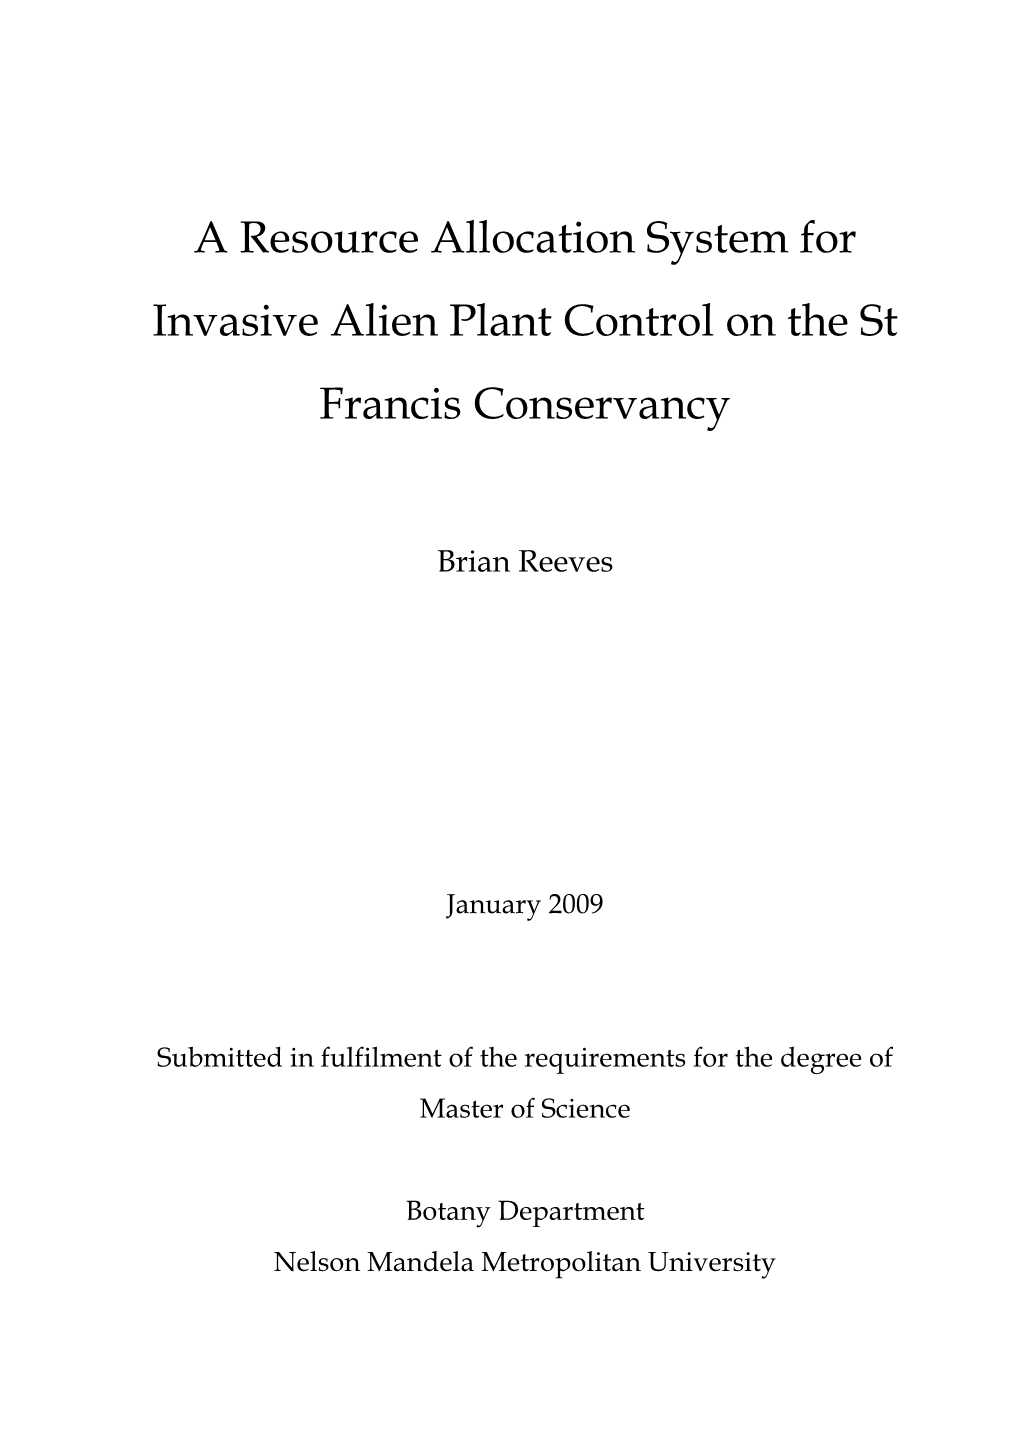 A Resource Allocation System for Invasive Alien Plant Control on the St Francis Conservancy